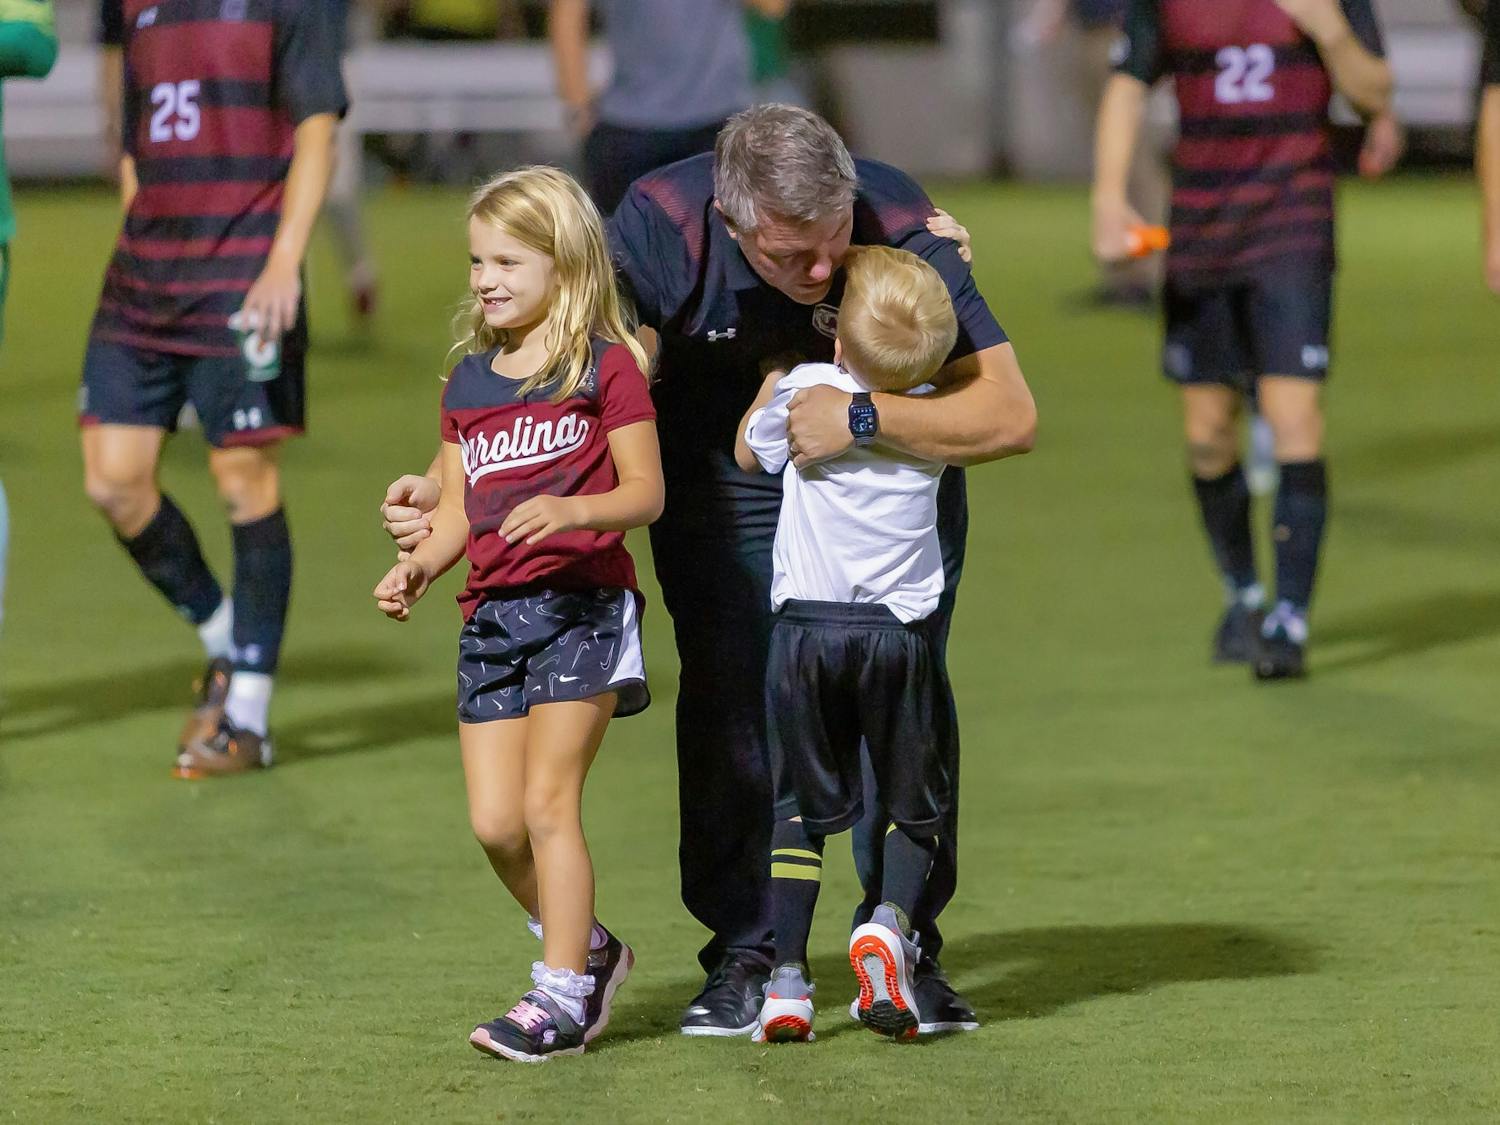 South Carolina men's soccer coach Tony Annan meets his children on the field following a victory over Gardner-Webb on Sept. 28, 2021. 